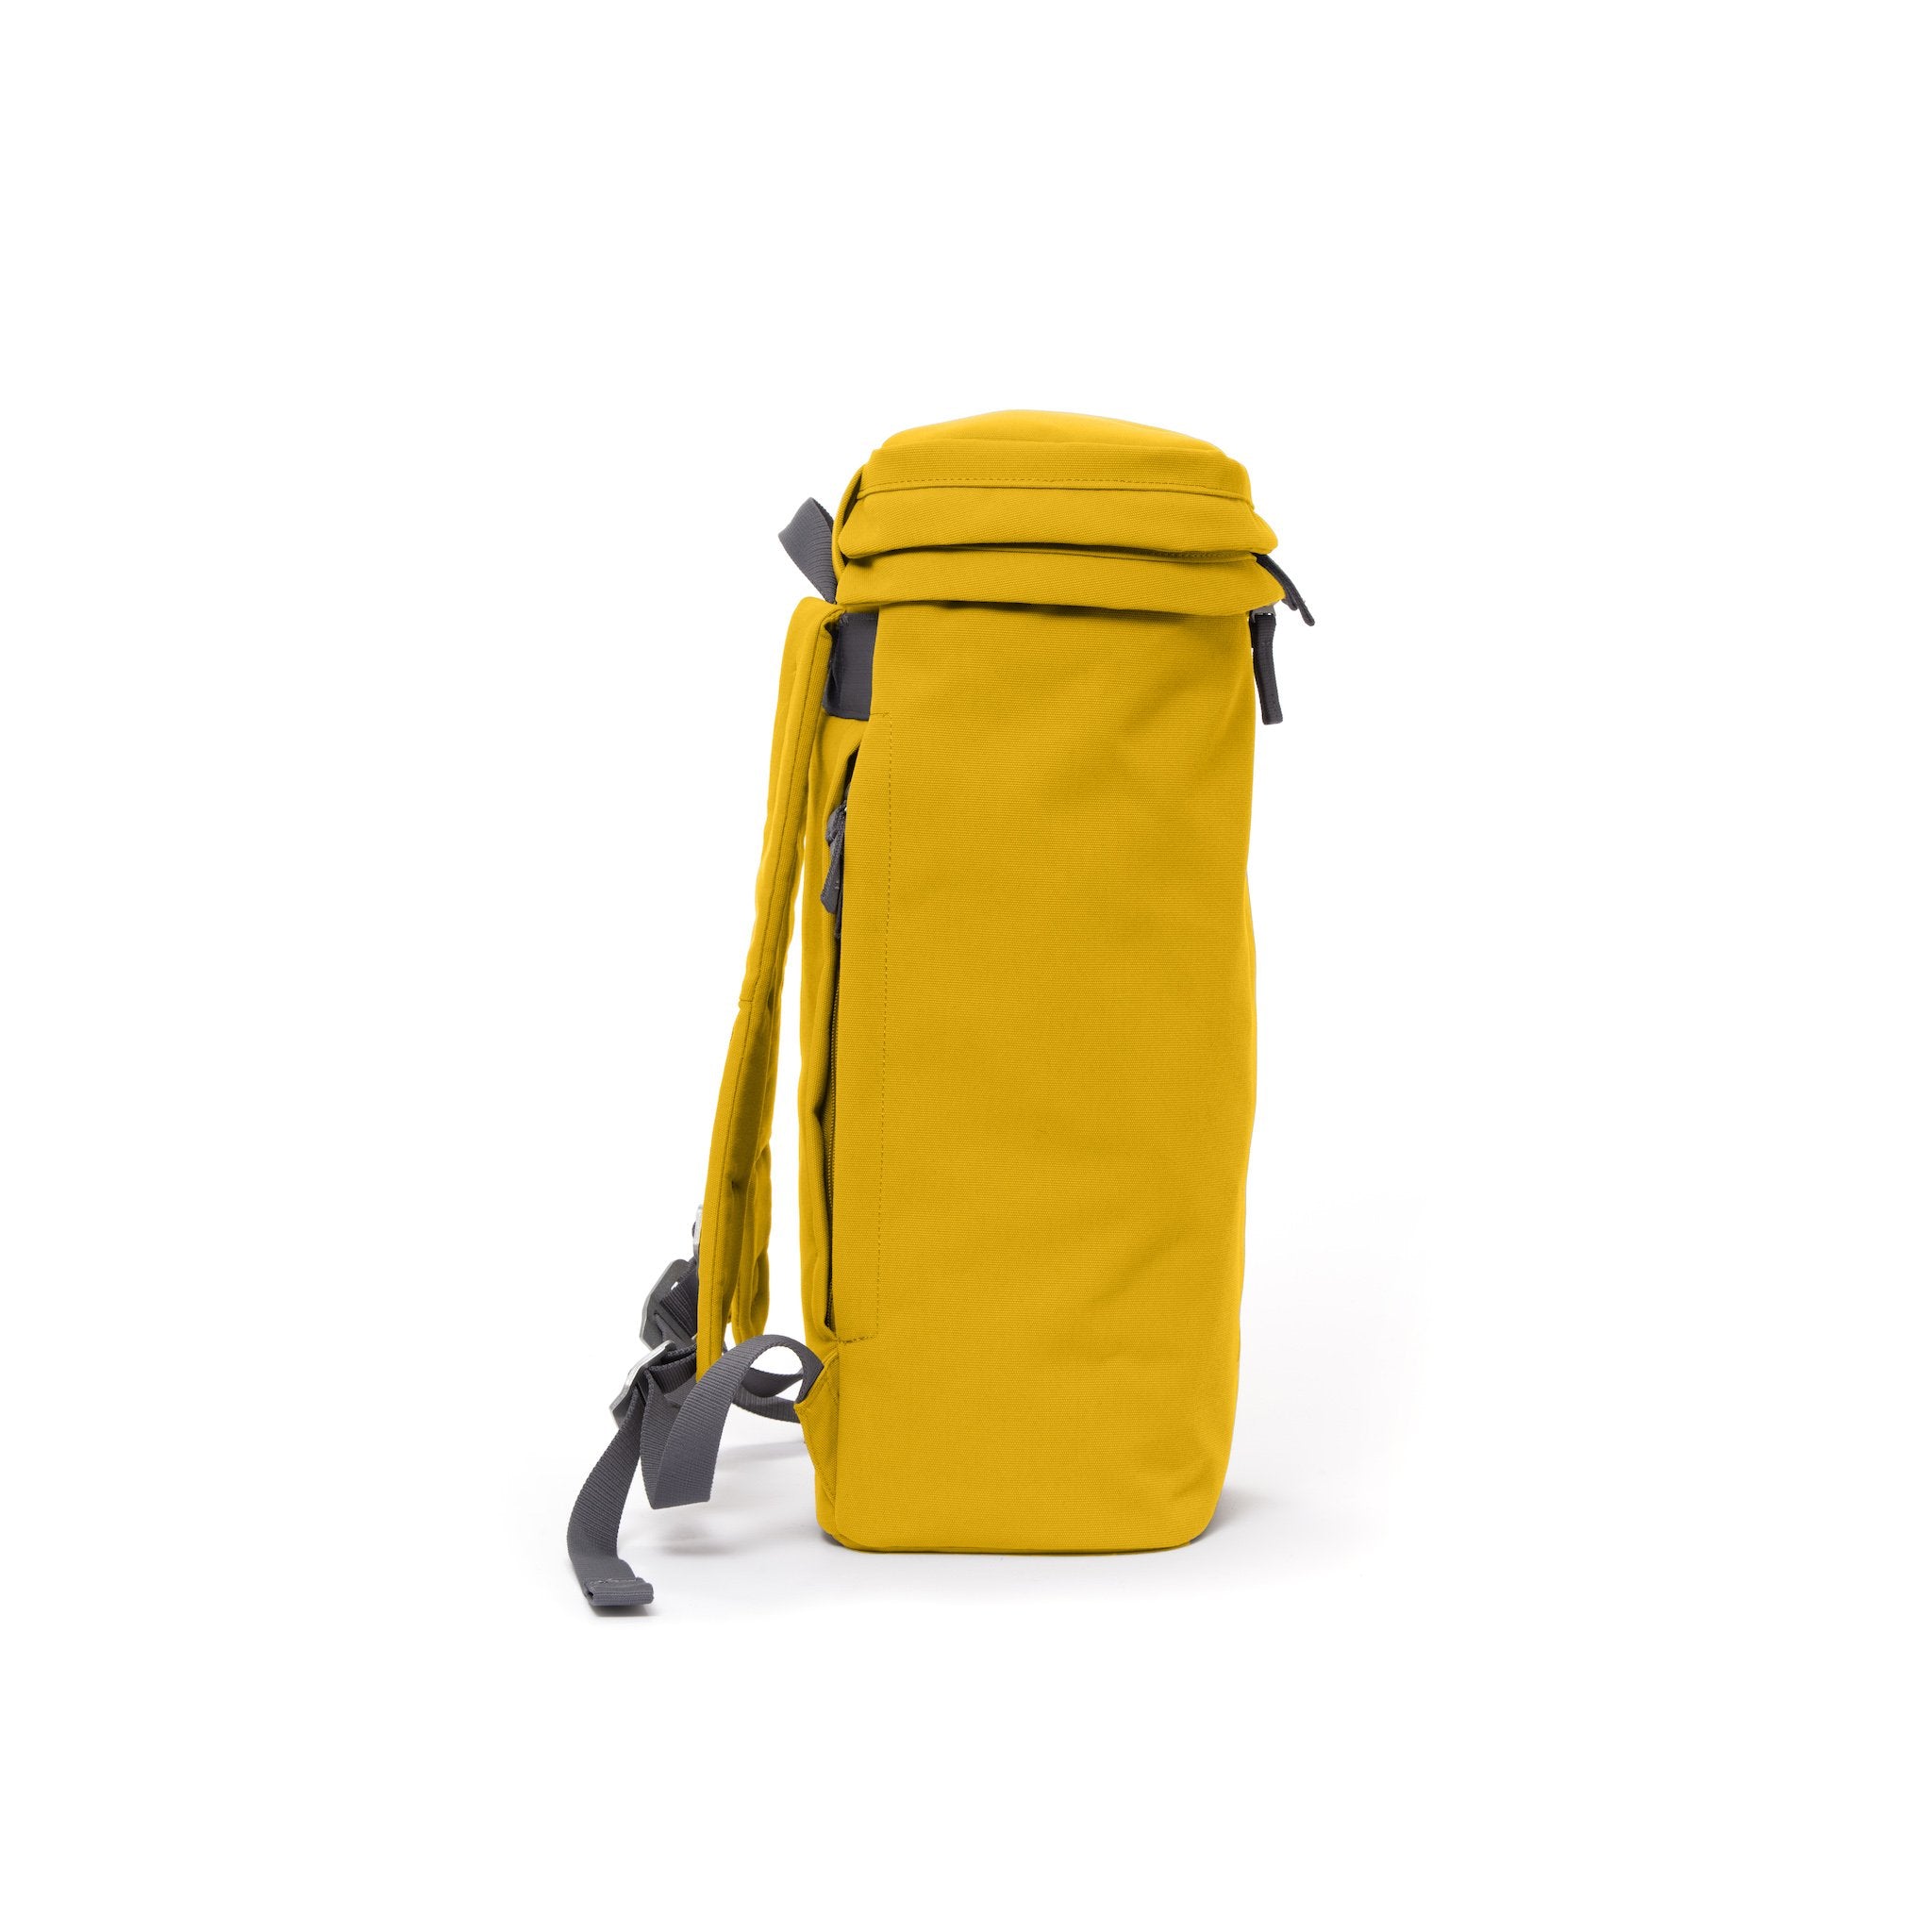 Yellow canvas backpack with top zip pocket.